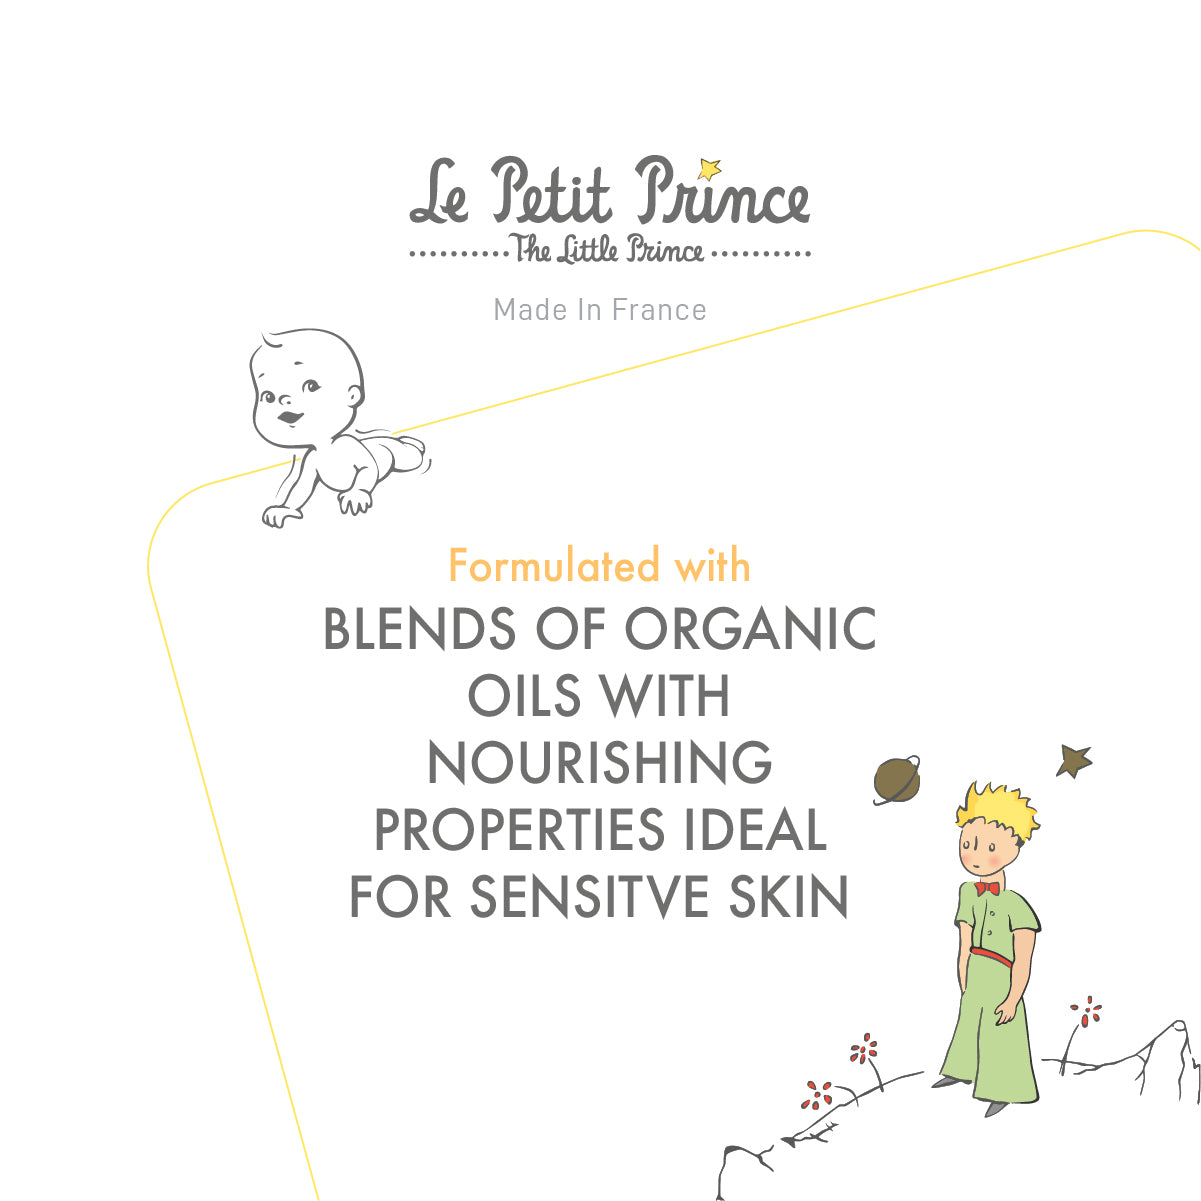 Le Petit Prince Relaxing Soothing Oil - 150 ml